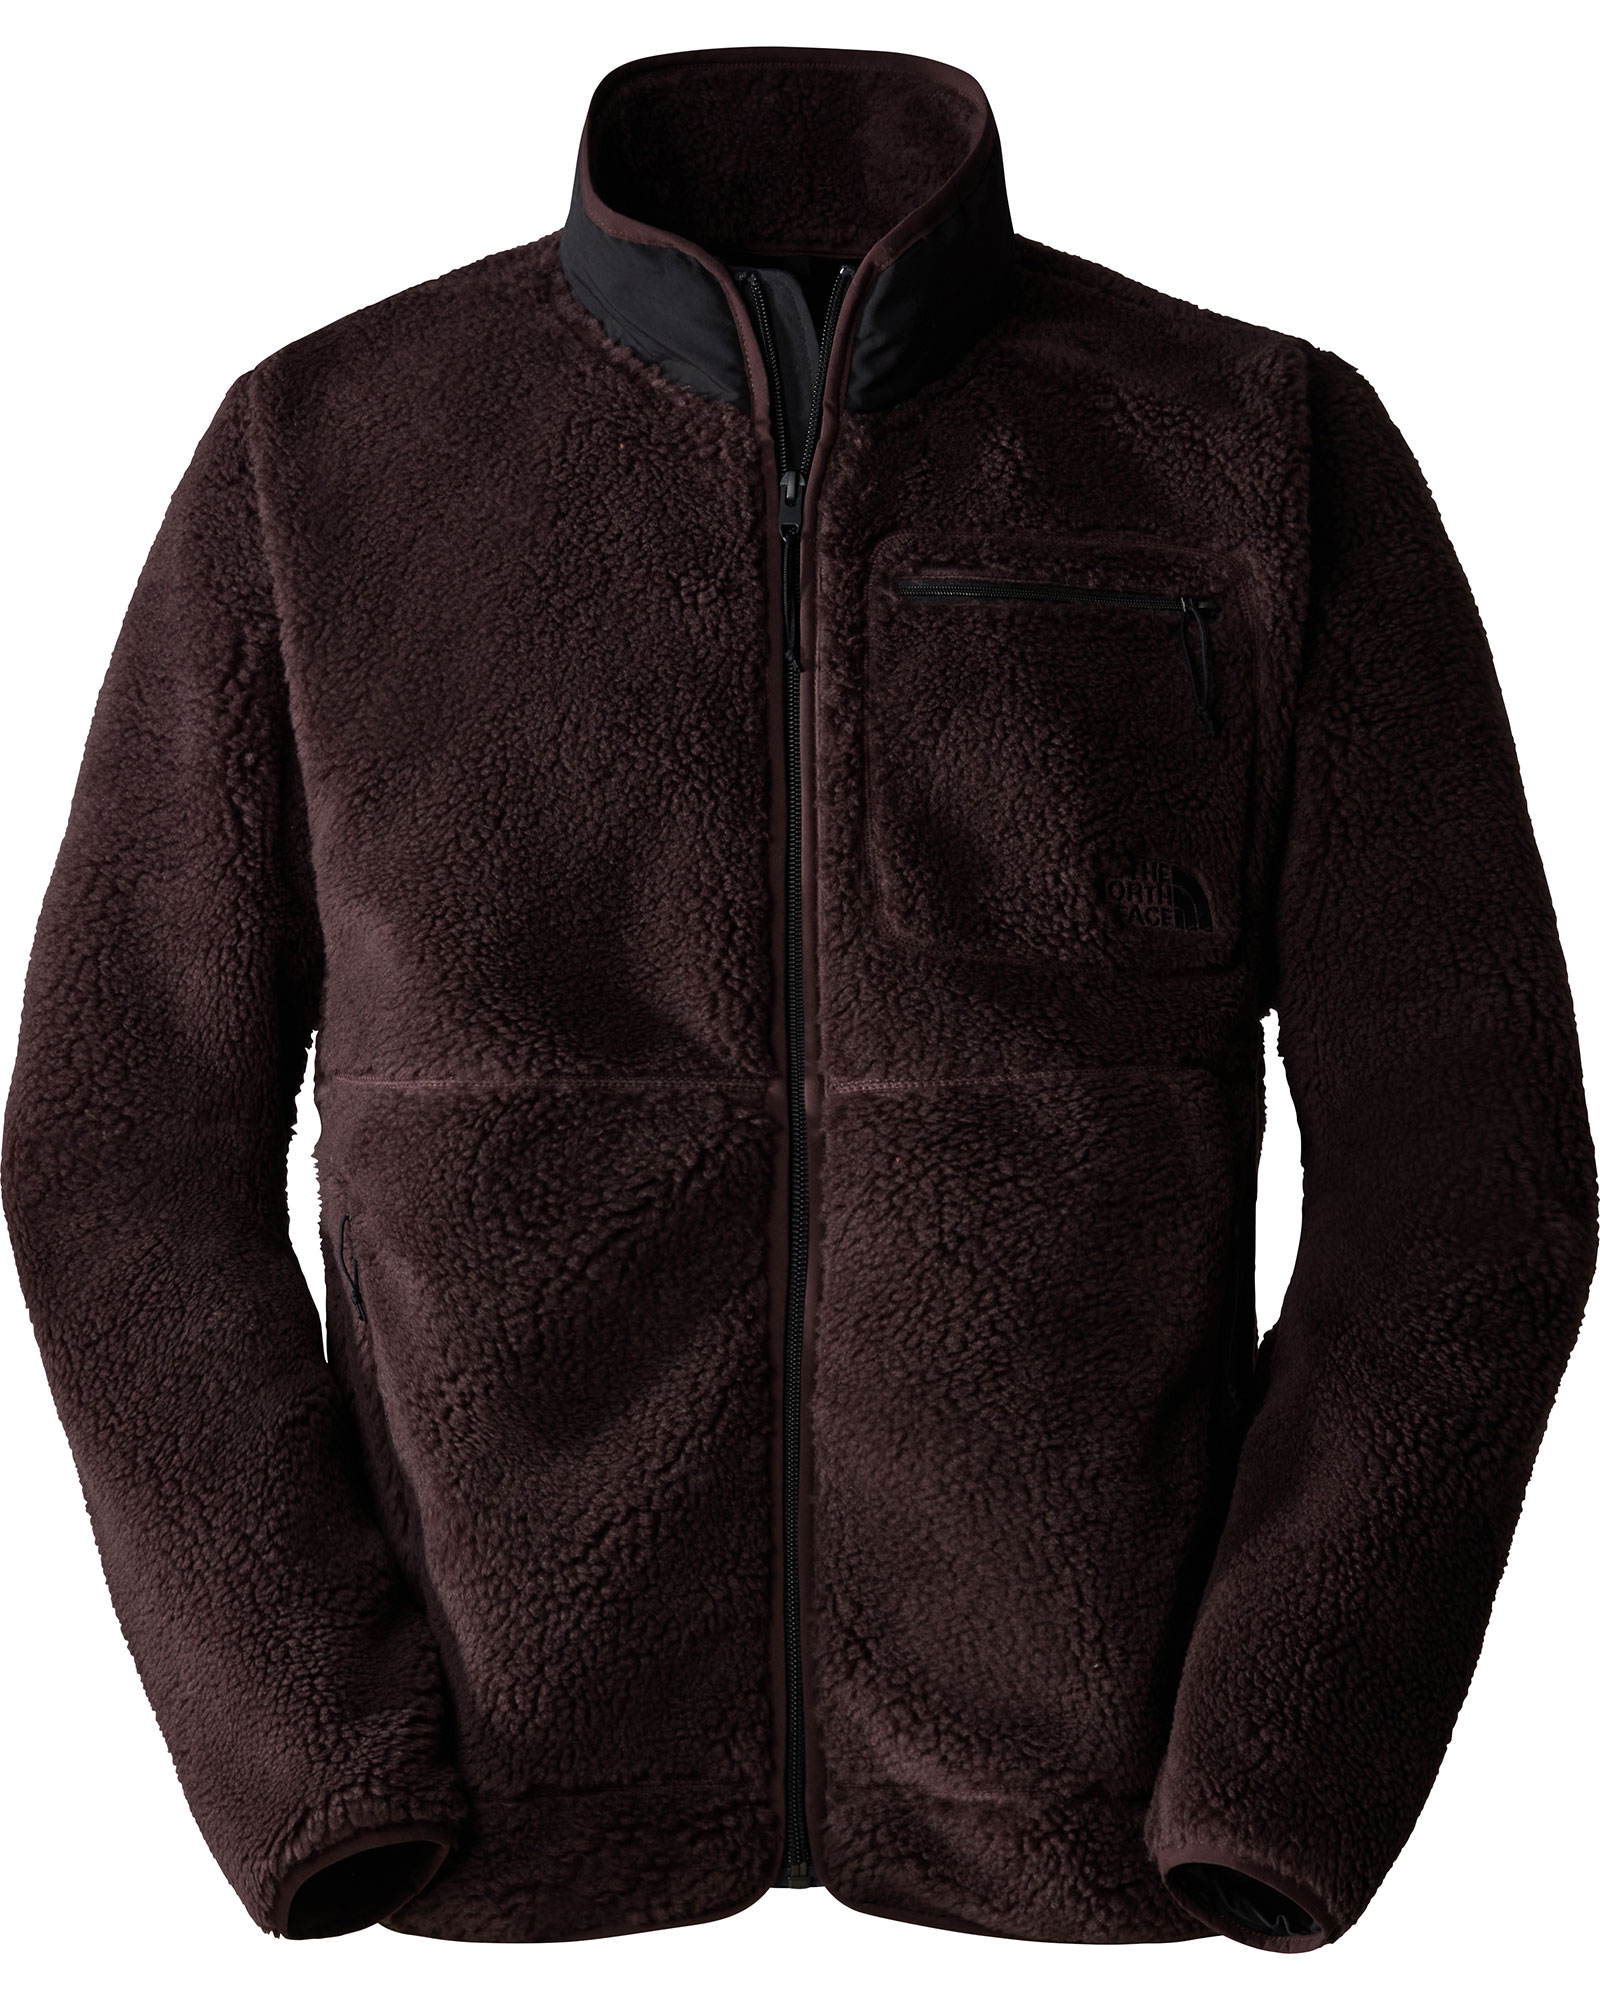 The North Face Men’s Extreme Pile Full Zip Jacket - Coal Brown XS